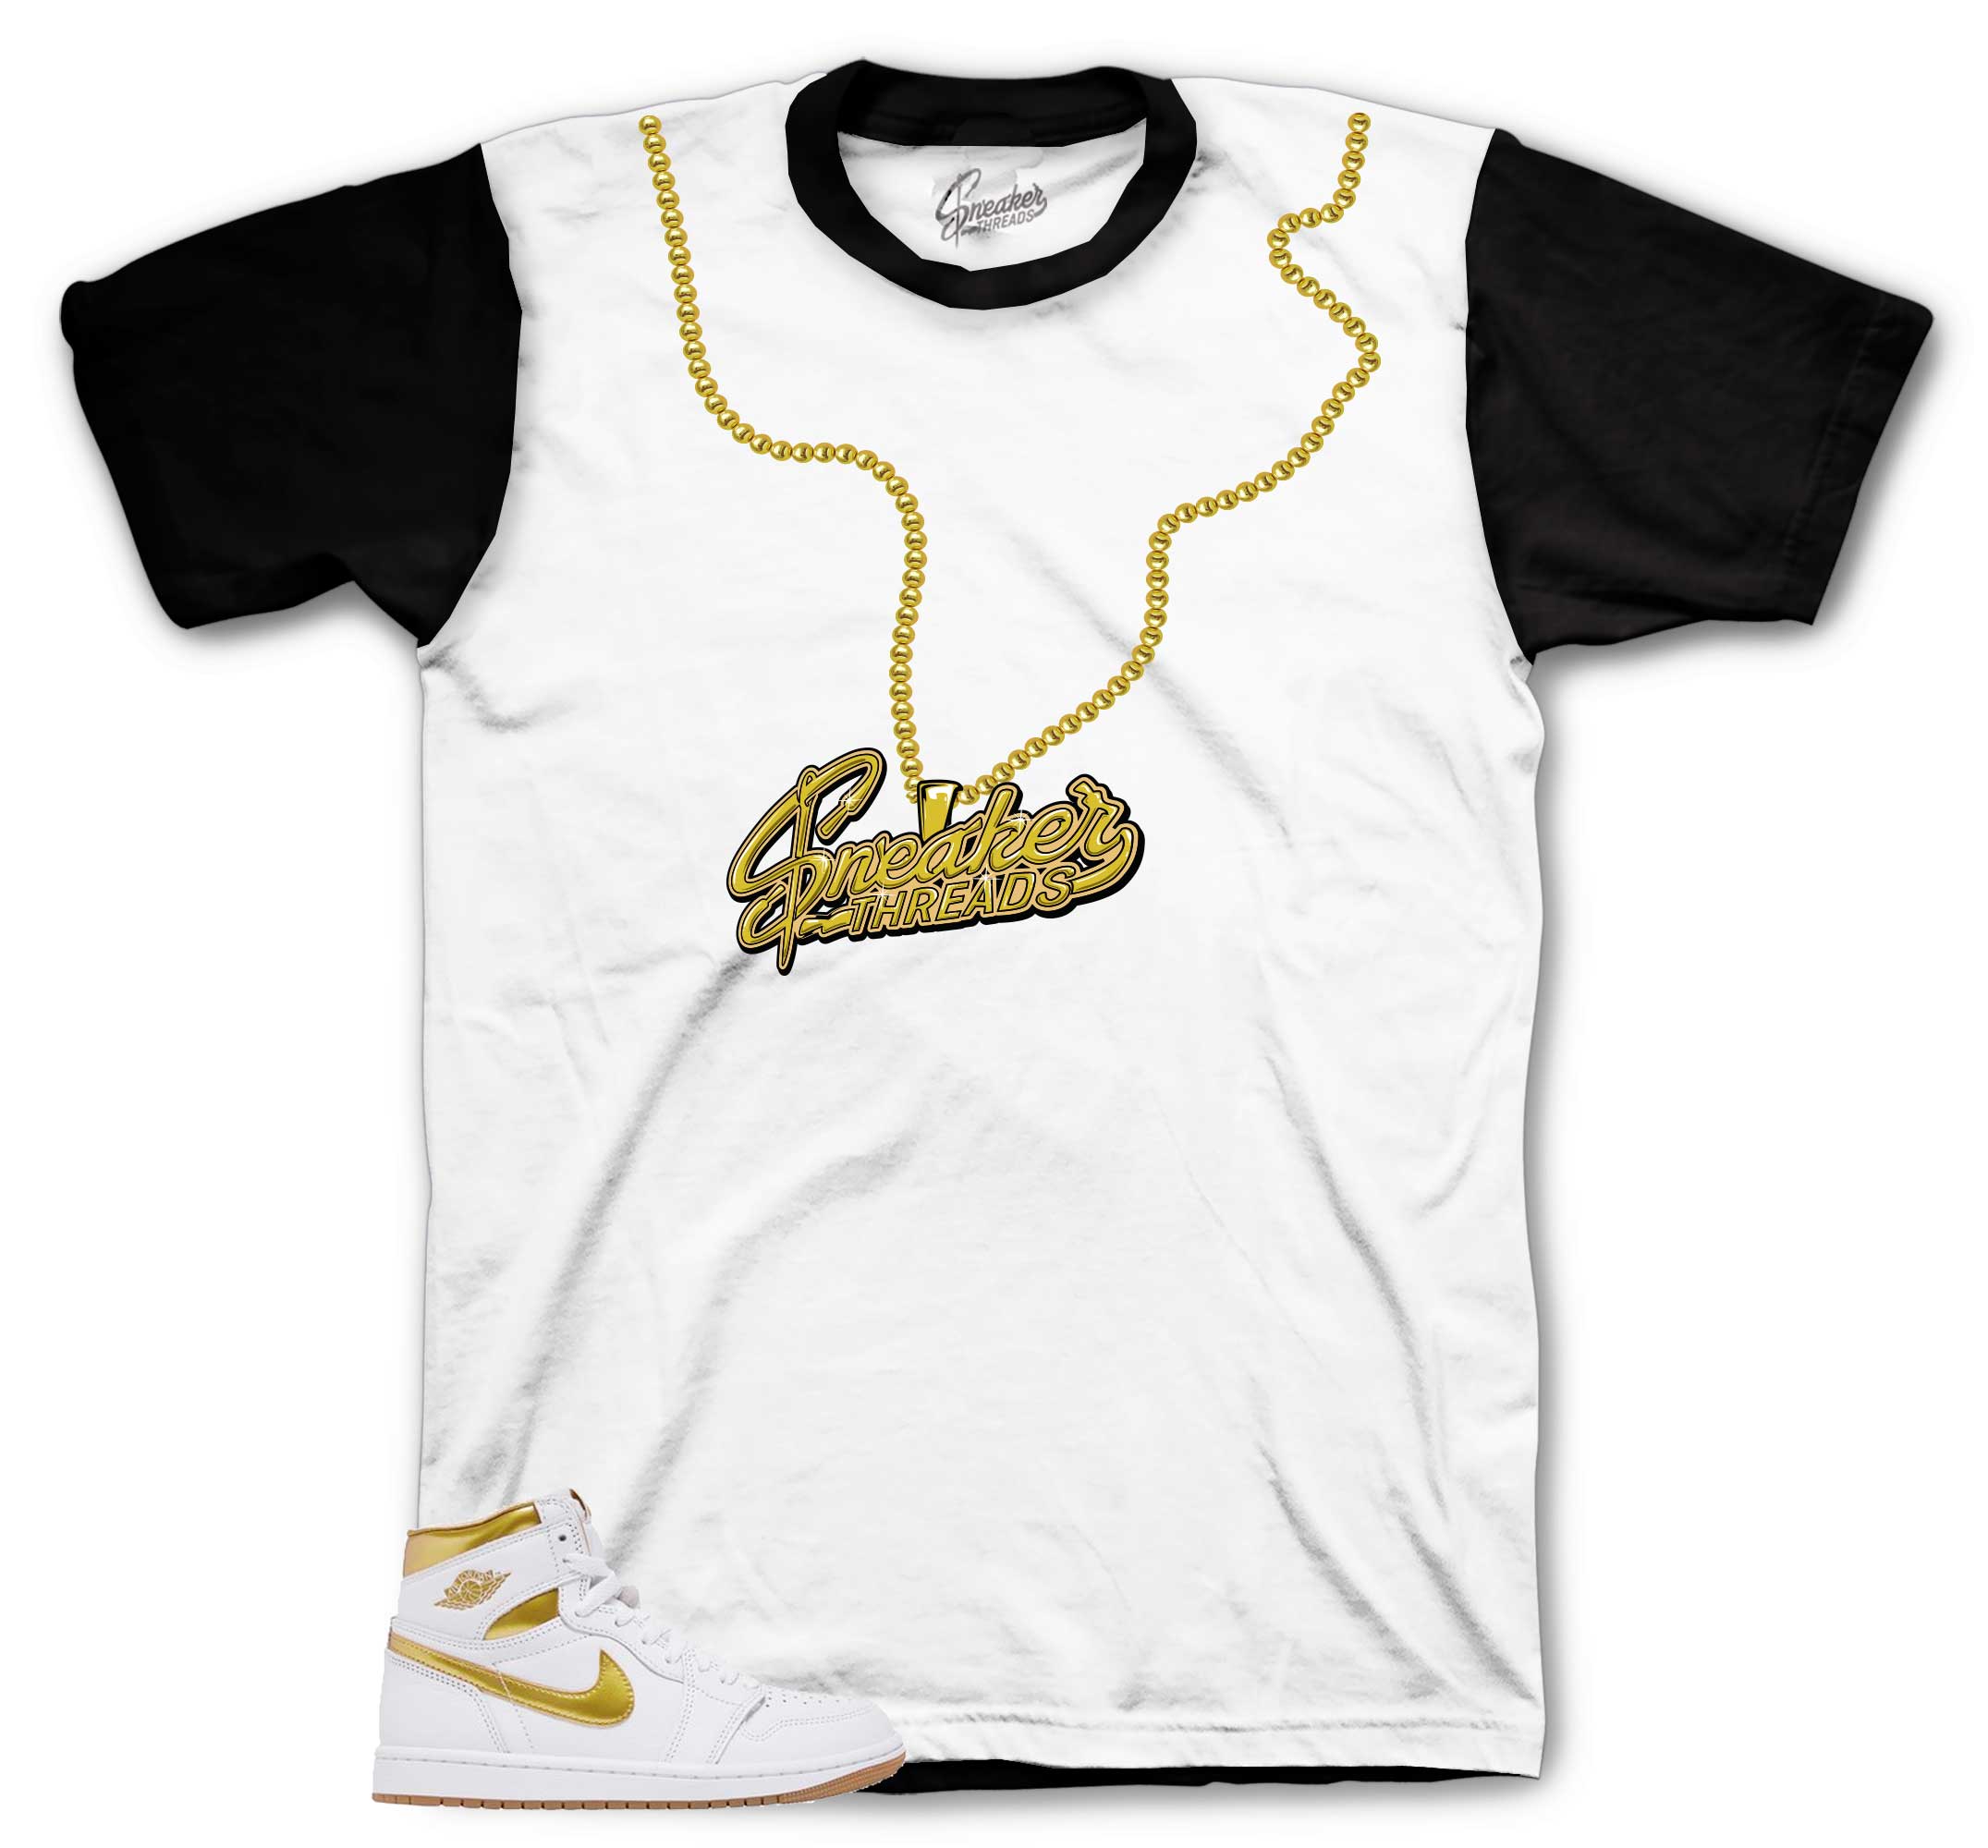 Sublimated Sneaker Tees - Tech Tees